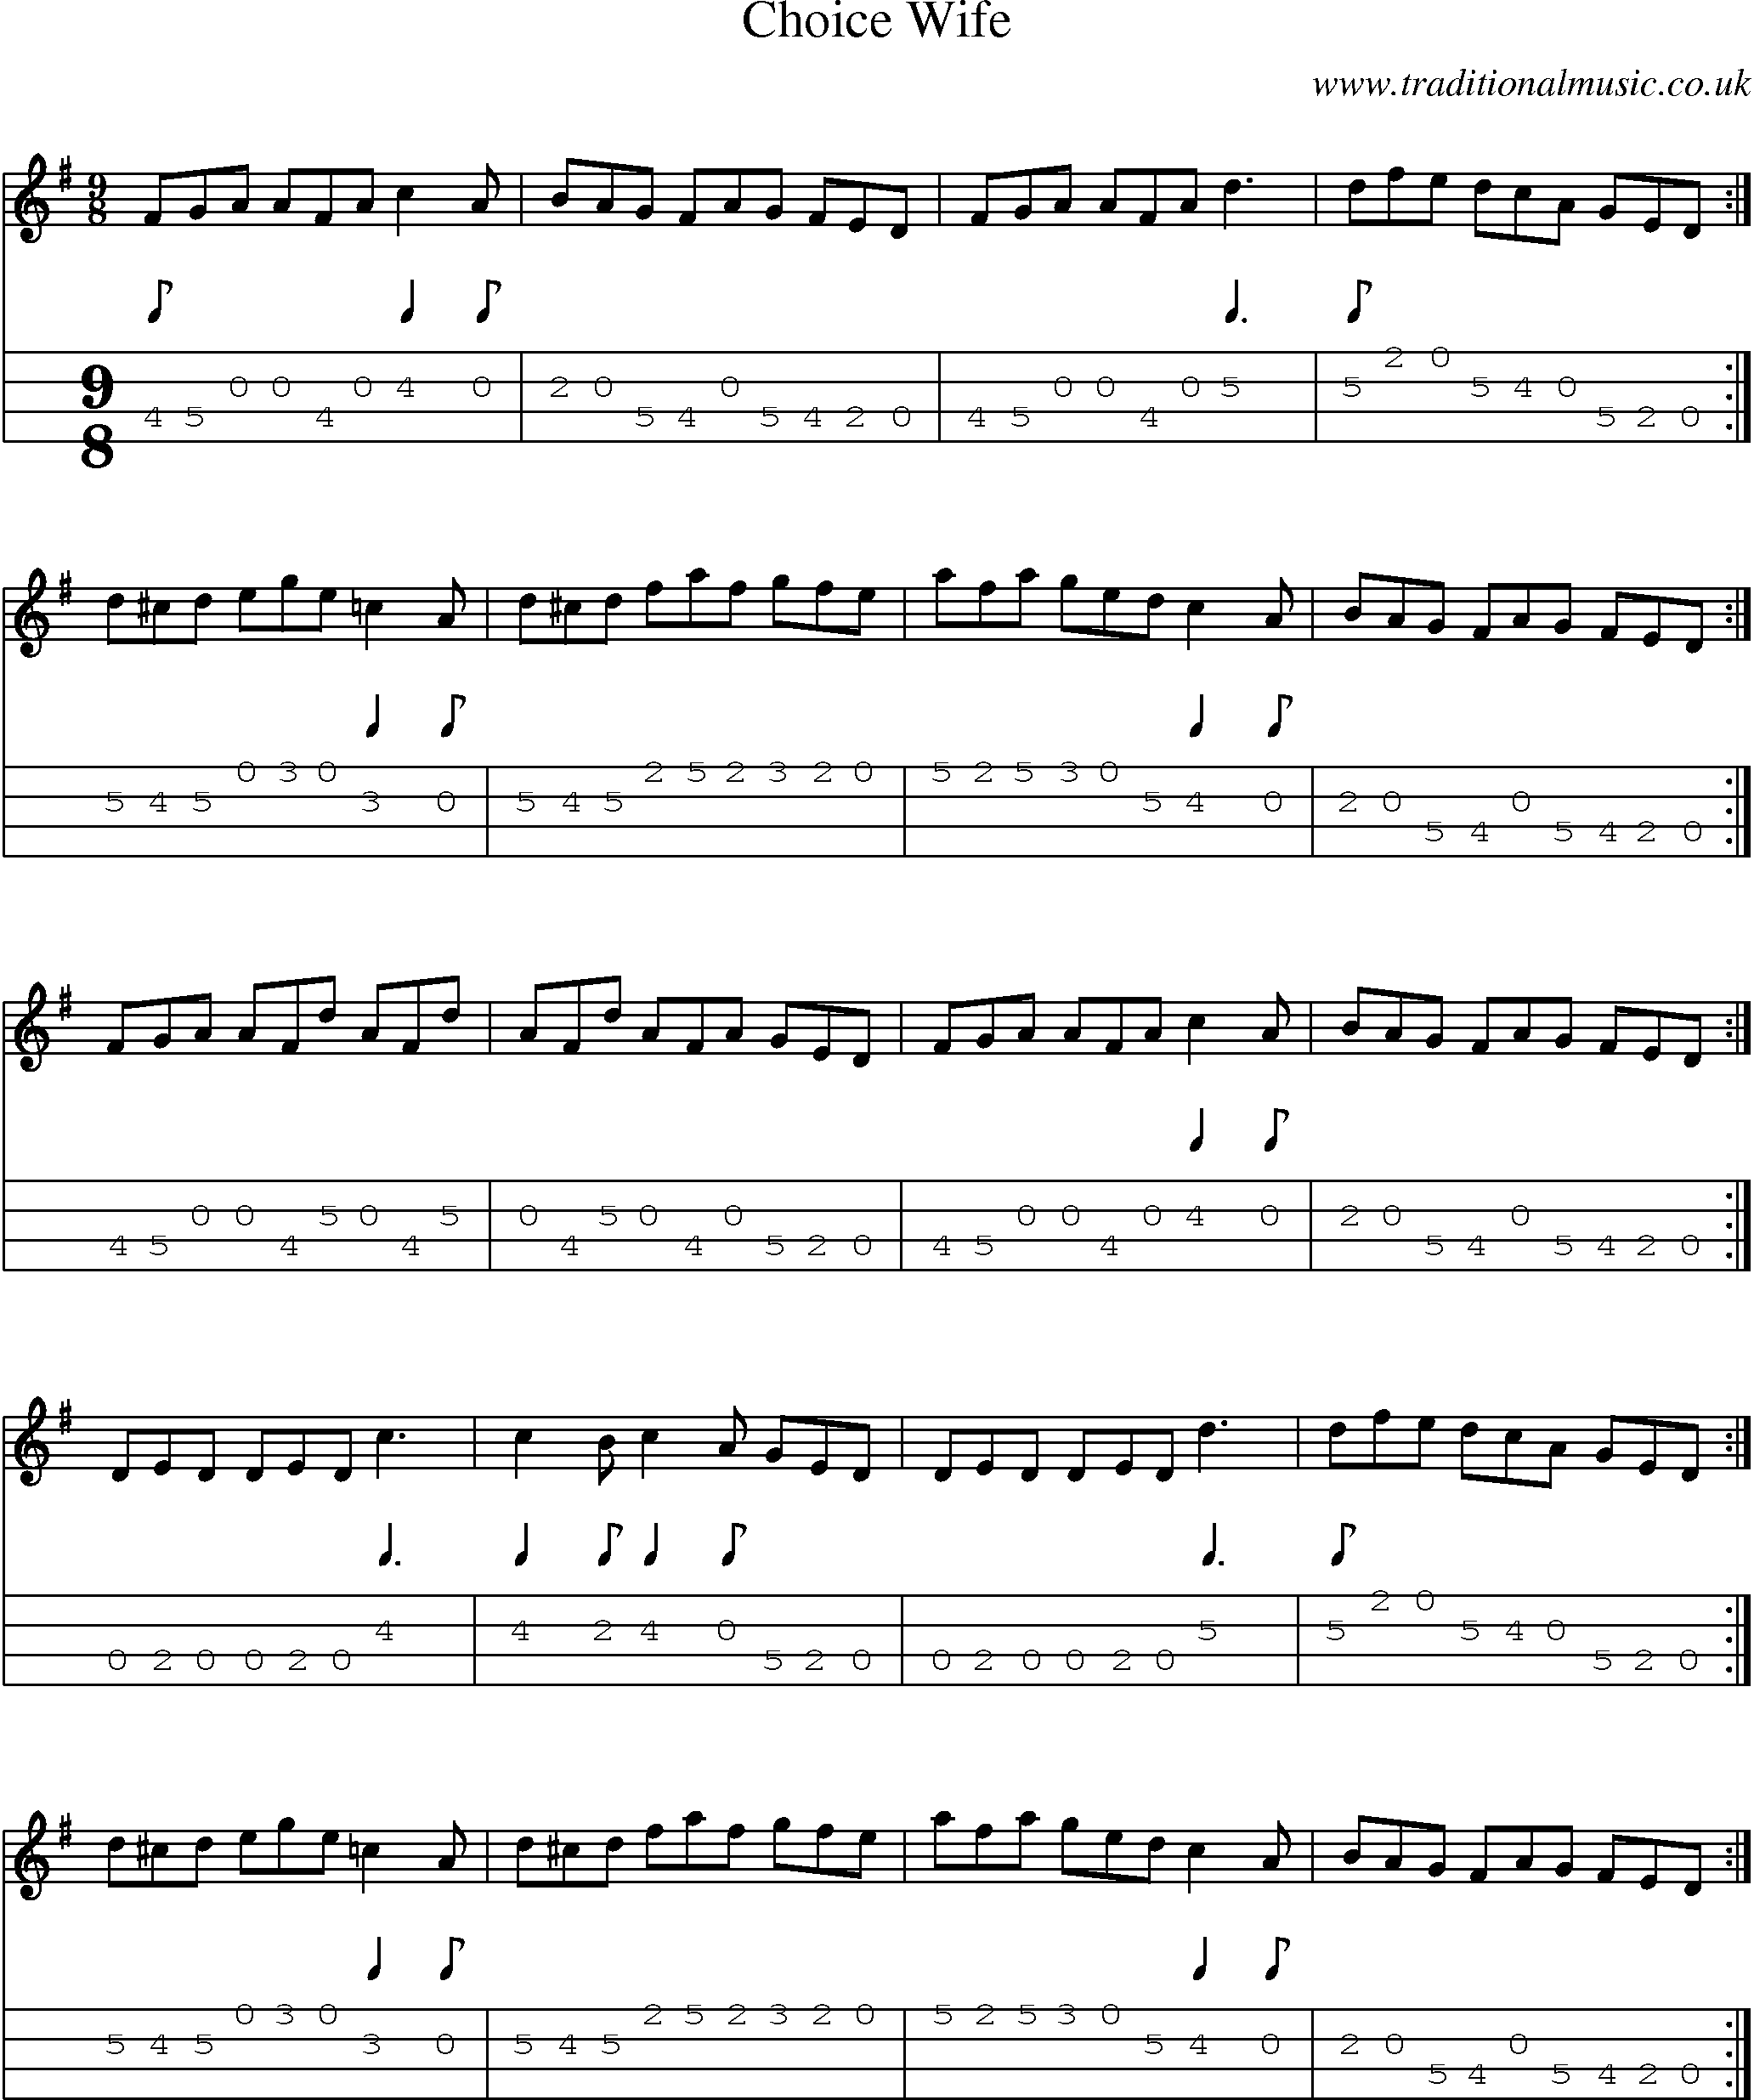 Music Score and Mandolin Tabs for Choice Wife